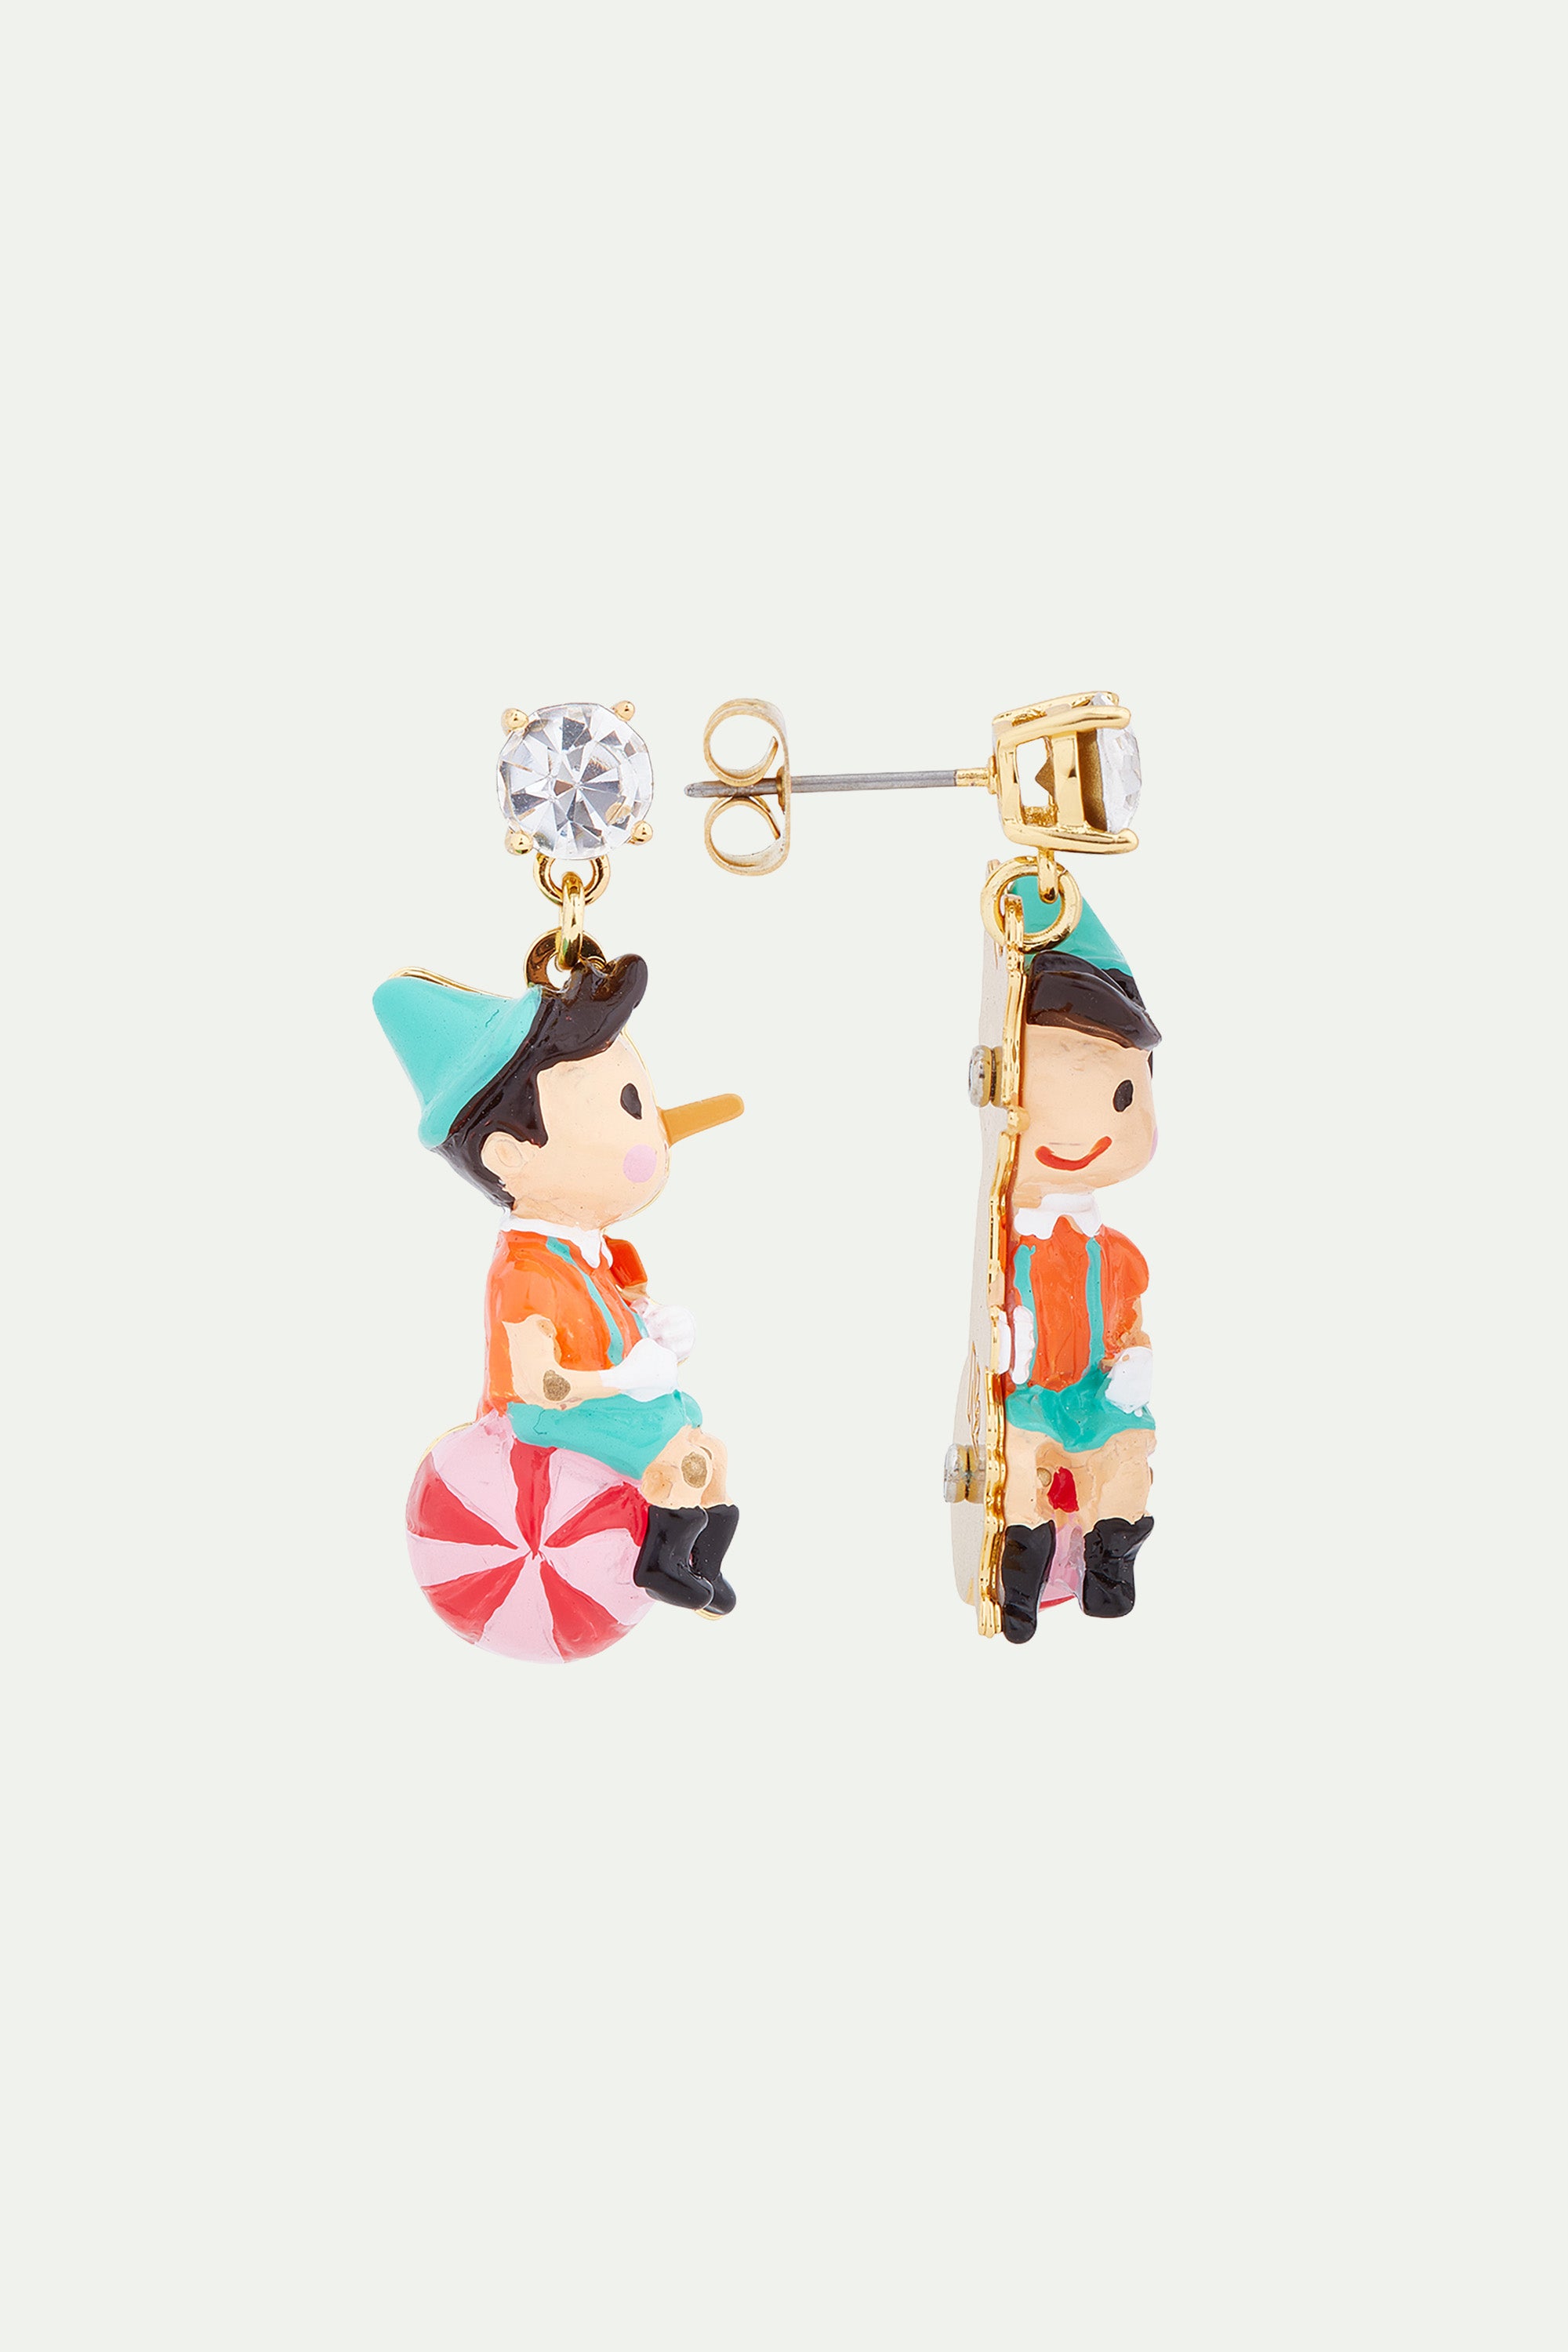 Pinocchio on his ball clip-on earrings